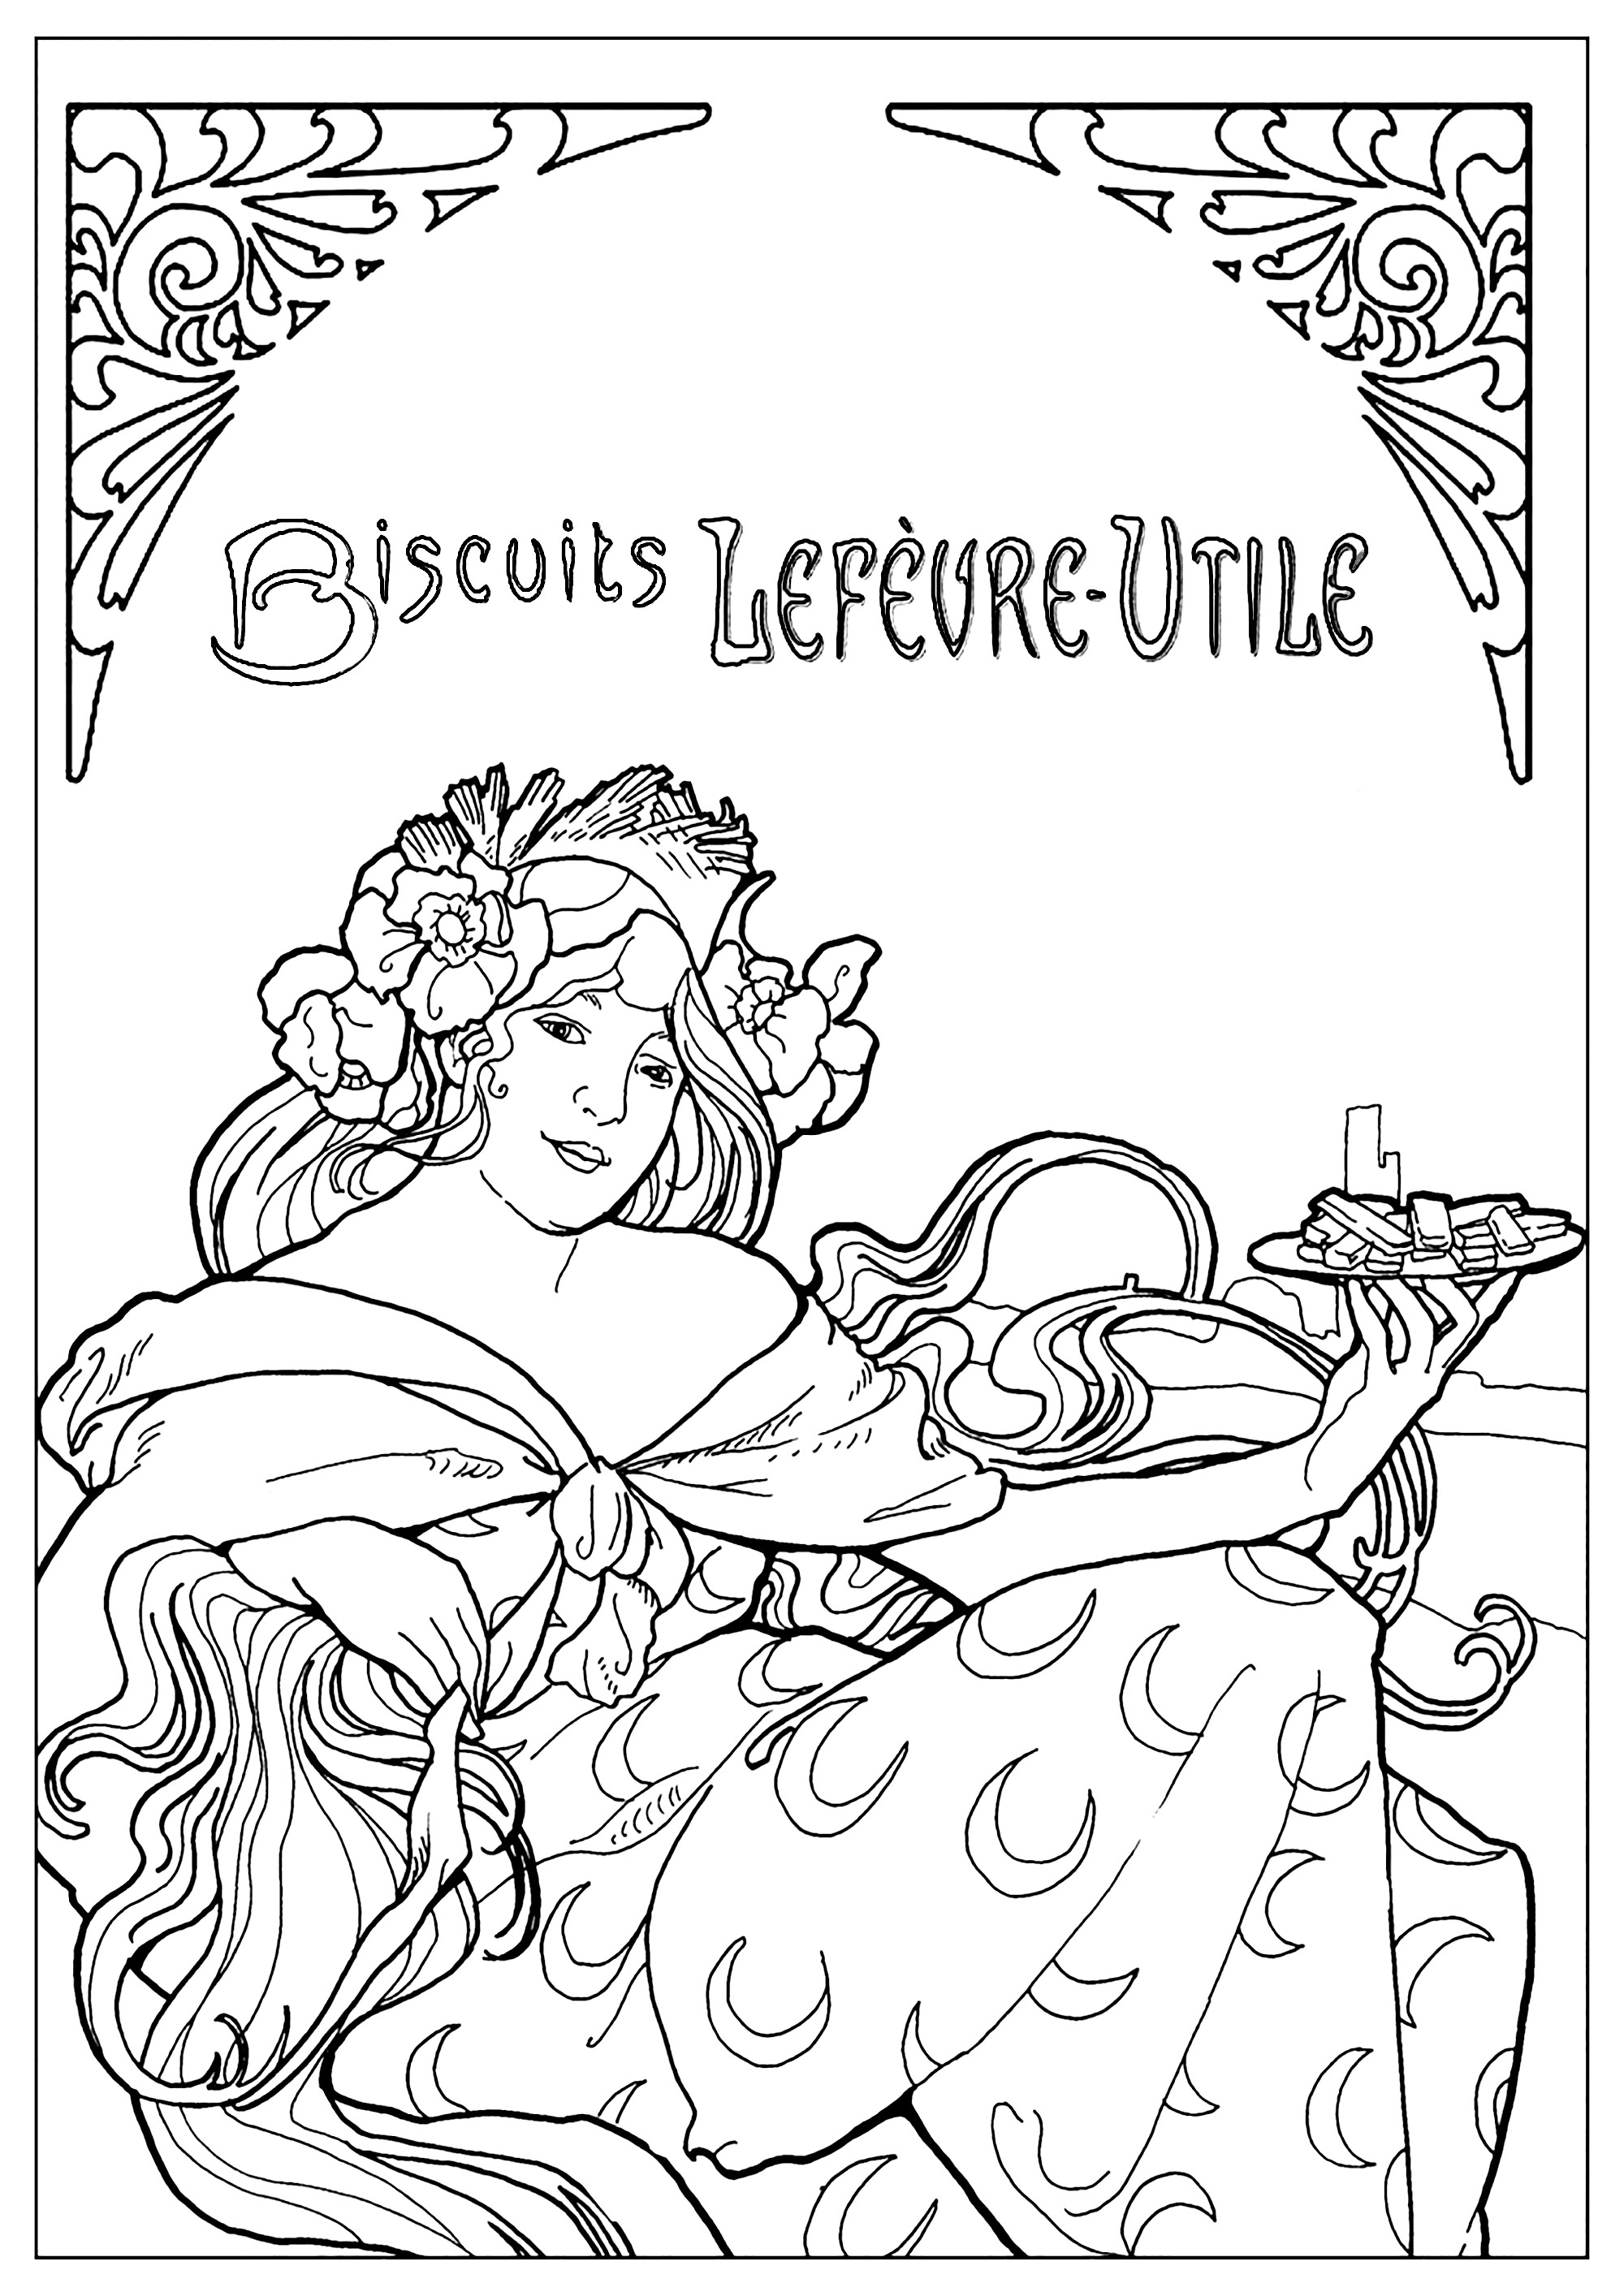 Coloring created from an advertising poster for Biscuits Lefèvre-Utile (L. U) by Alfons Mucha (1896)This poster is typical of the Art Nouveau style. A period copy can be seen at the Musée Carnavalet (musée de l